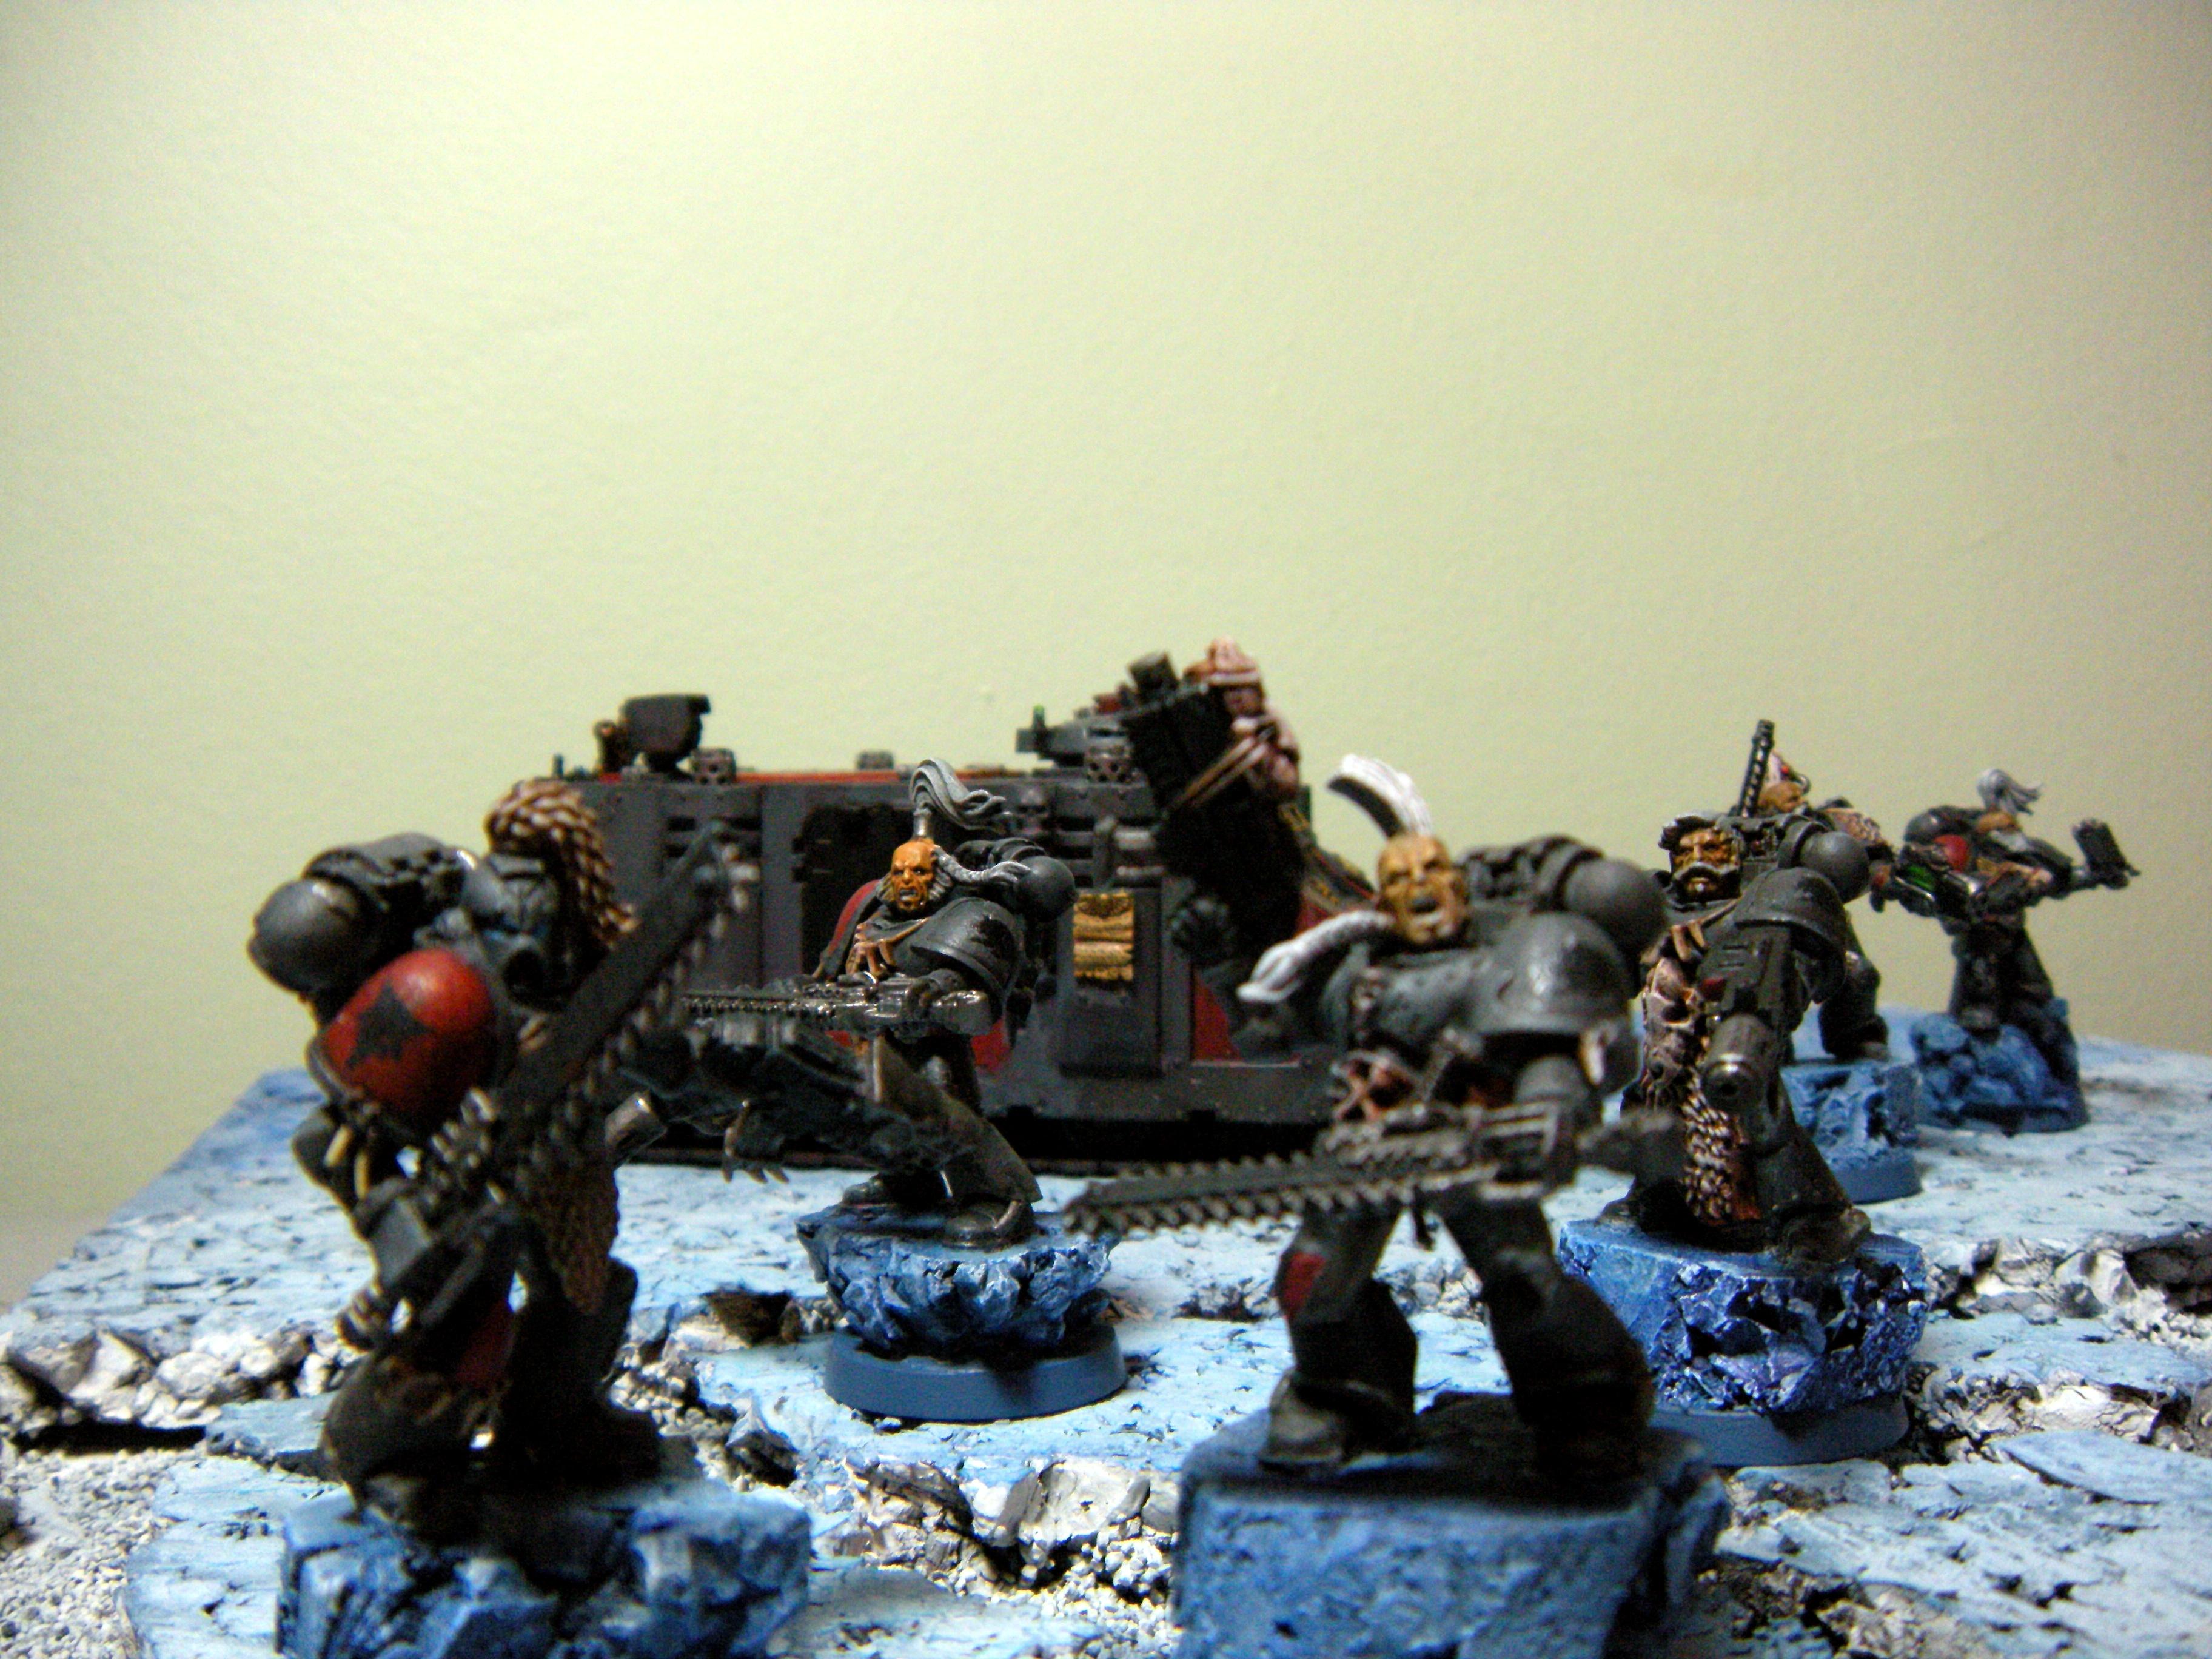 Bloodclaws, Bolters, Chainswords, Rhino, Space Marines, Space Wolves, Warhammer 40,000